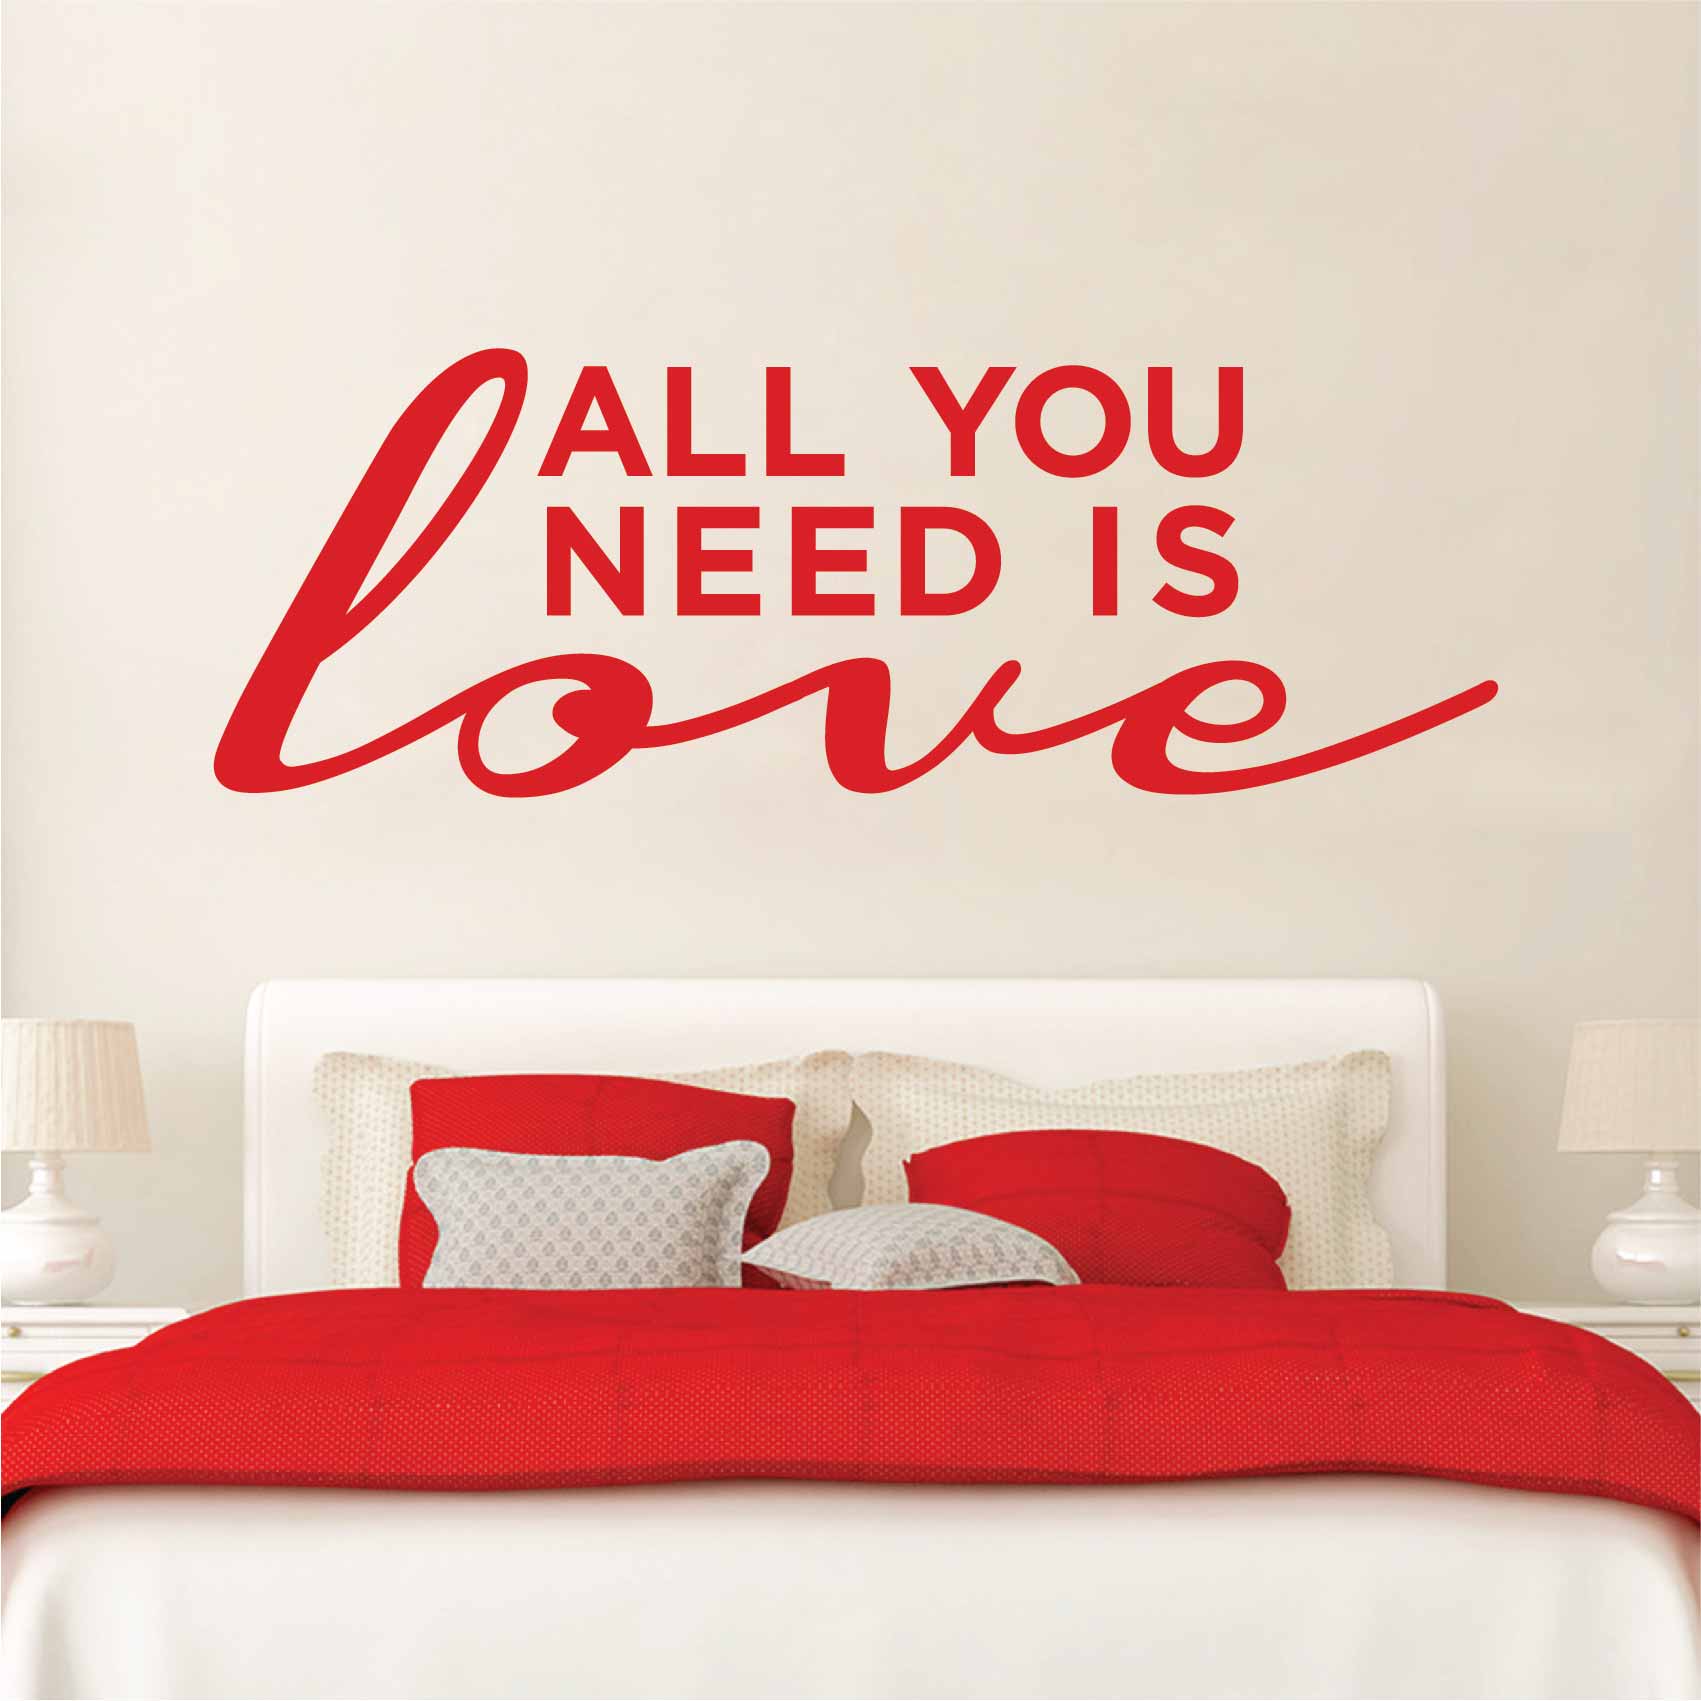 stickers-mural-all-you-need-is-love-ref7amour-stickers-muraux-amour-autocollant-deco-chambre-salon-cuisine-sticker-mural-love